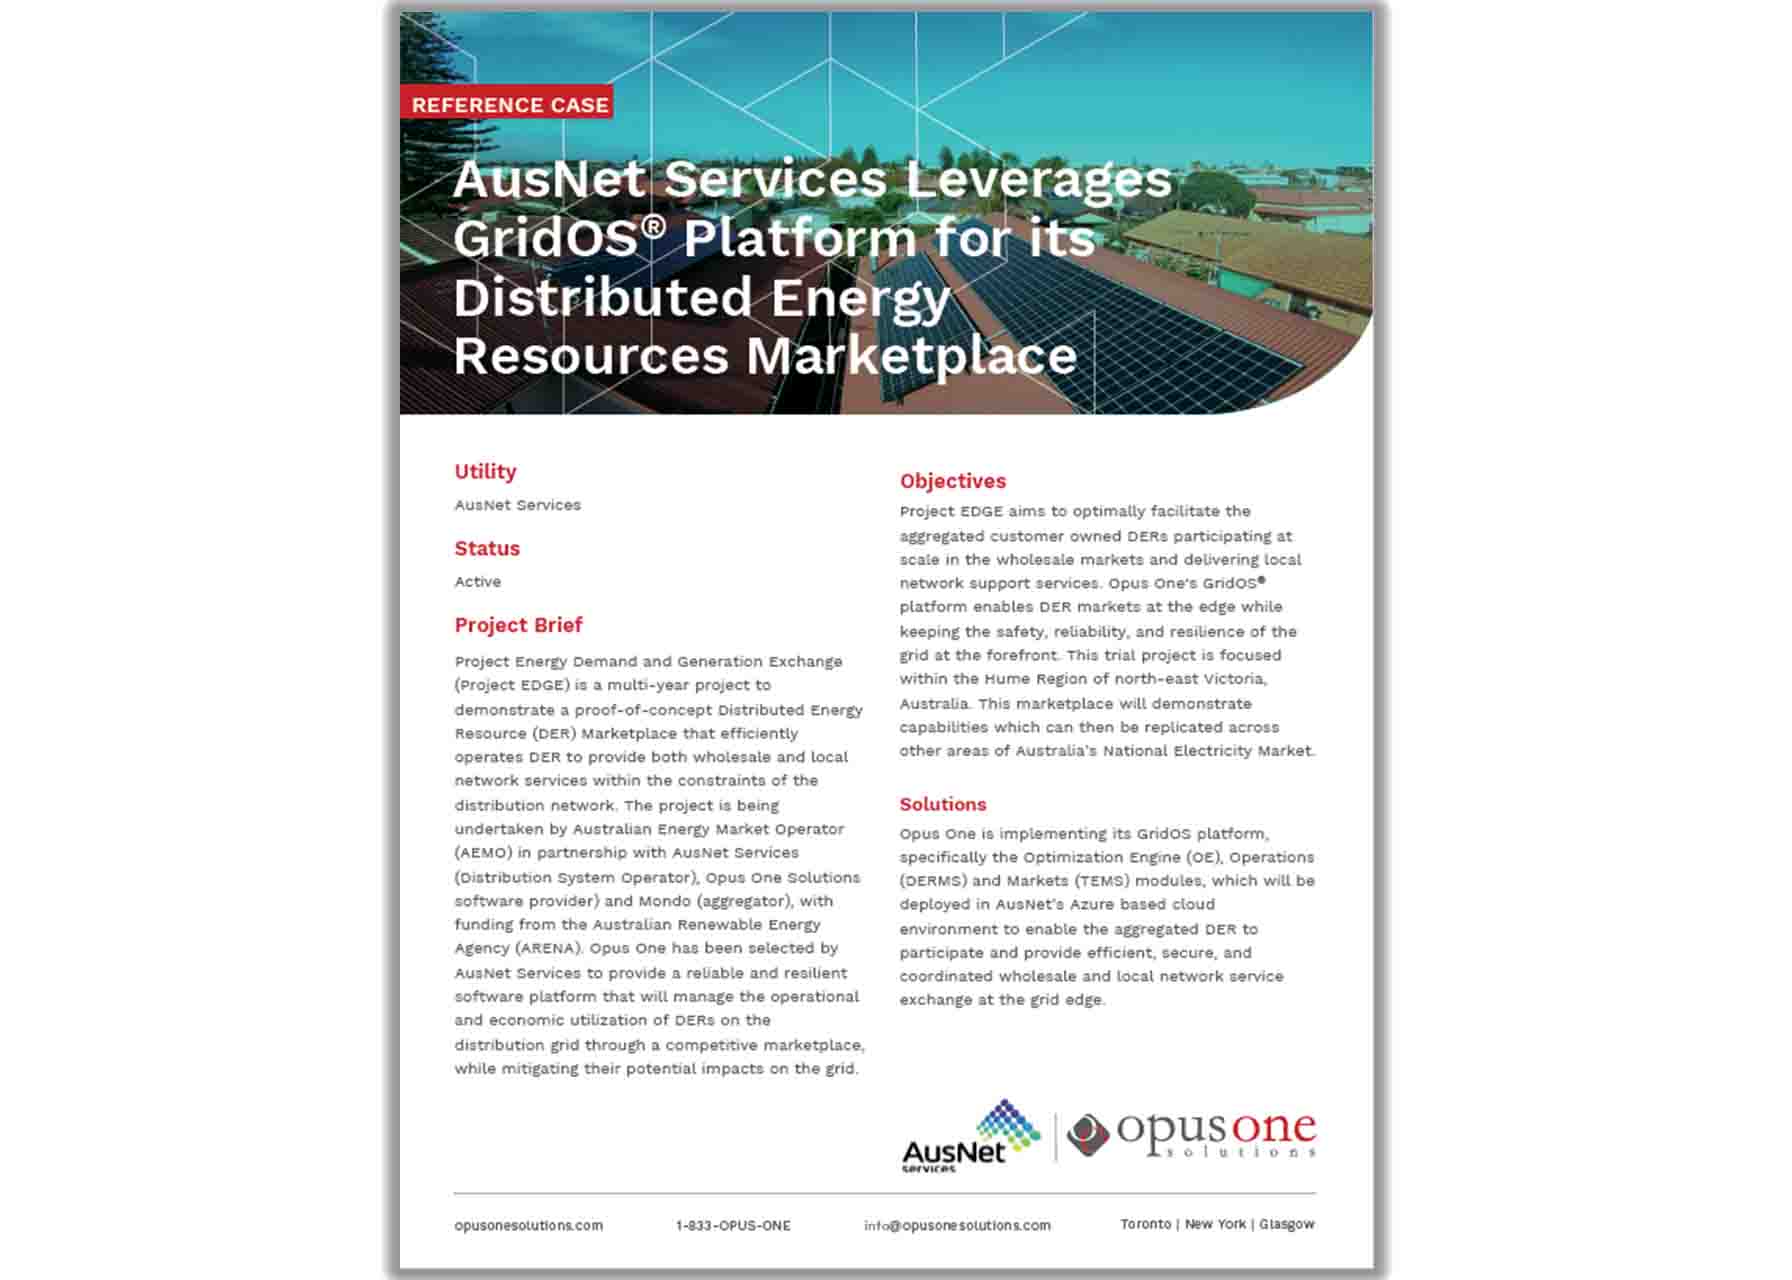 AusNet Services Leverages GridOS® Platform for its Distributed Energy Resources Marketplace